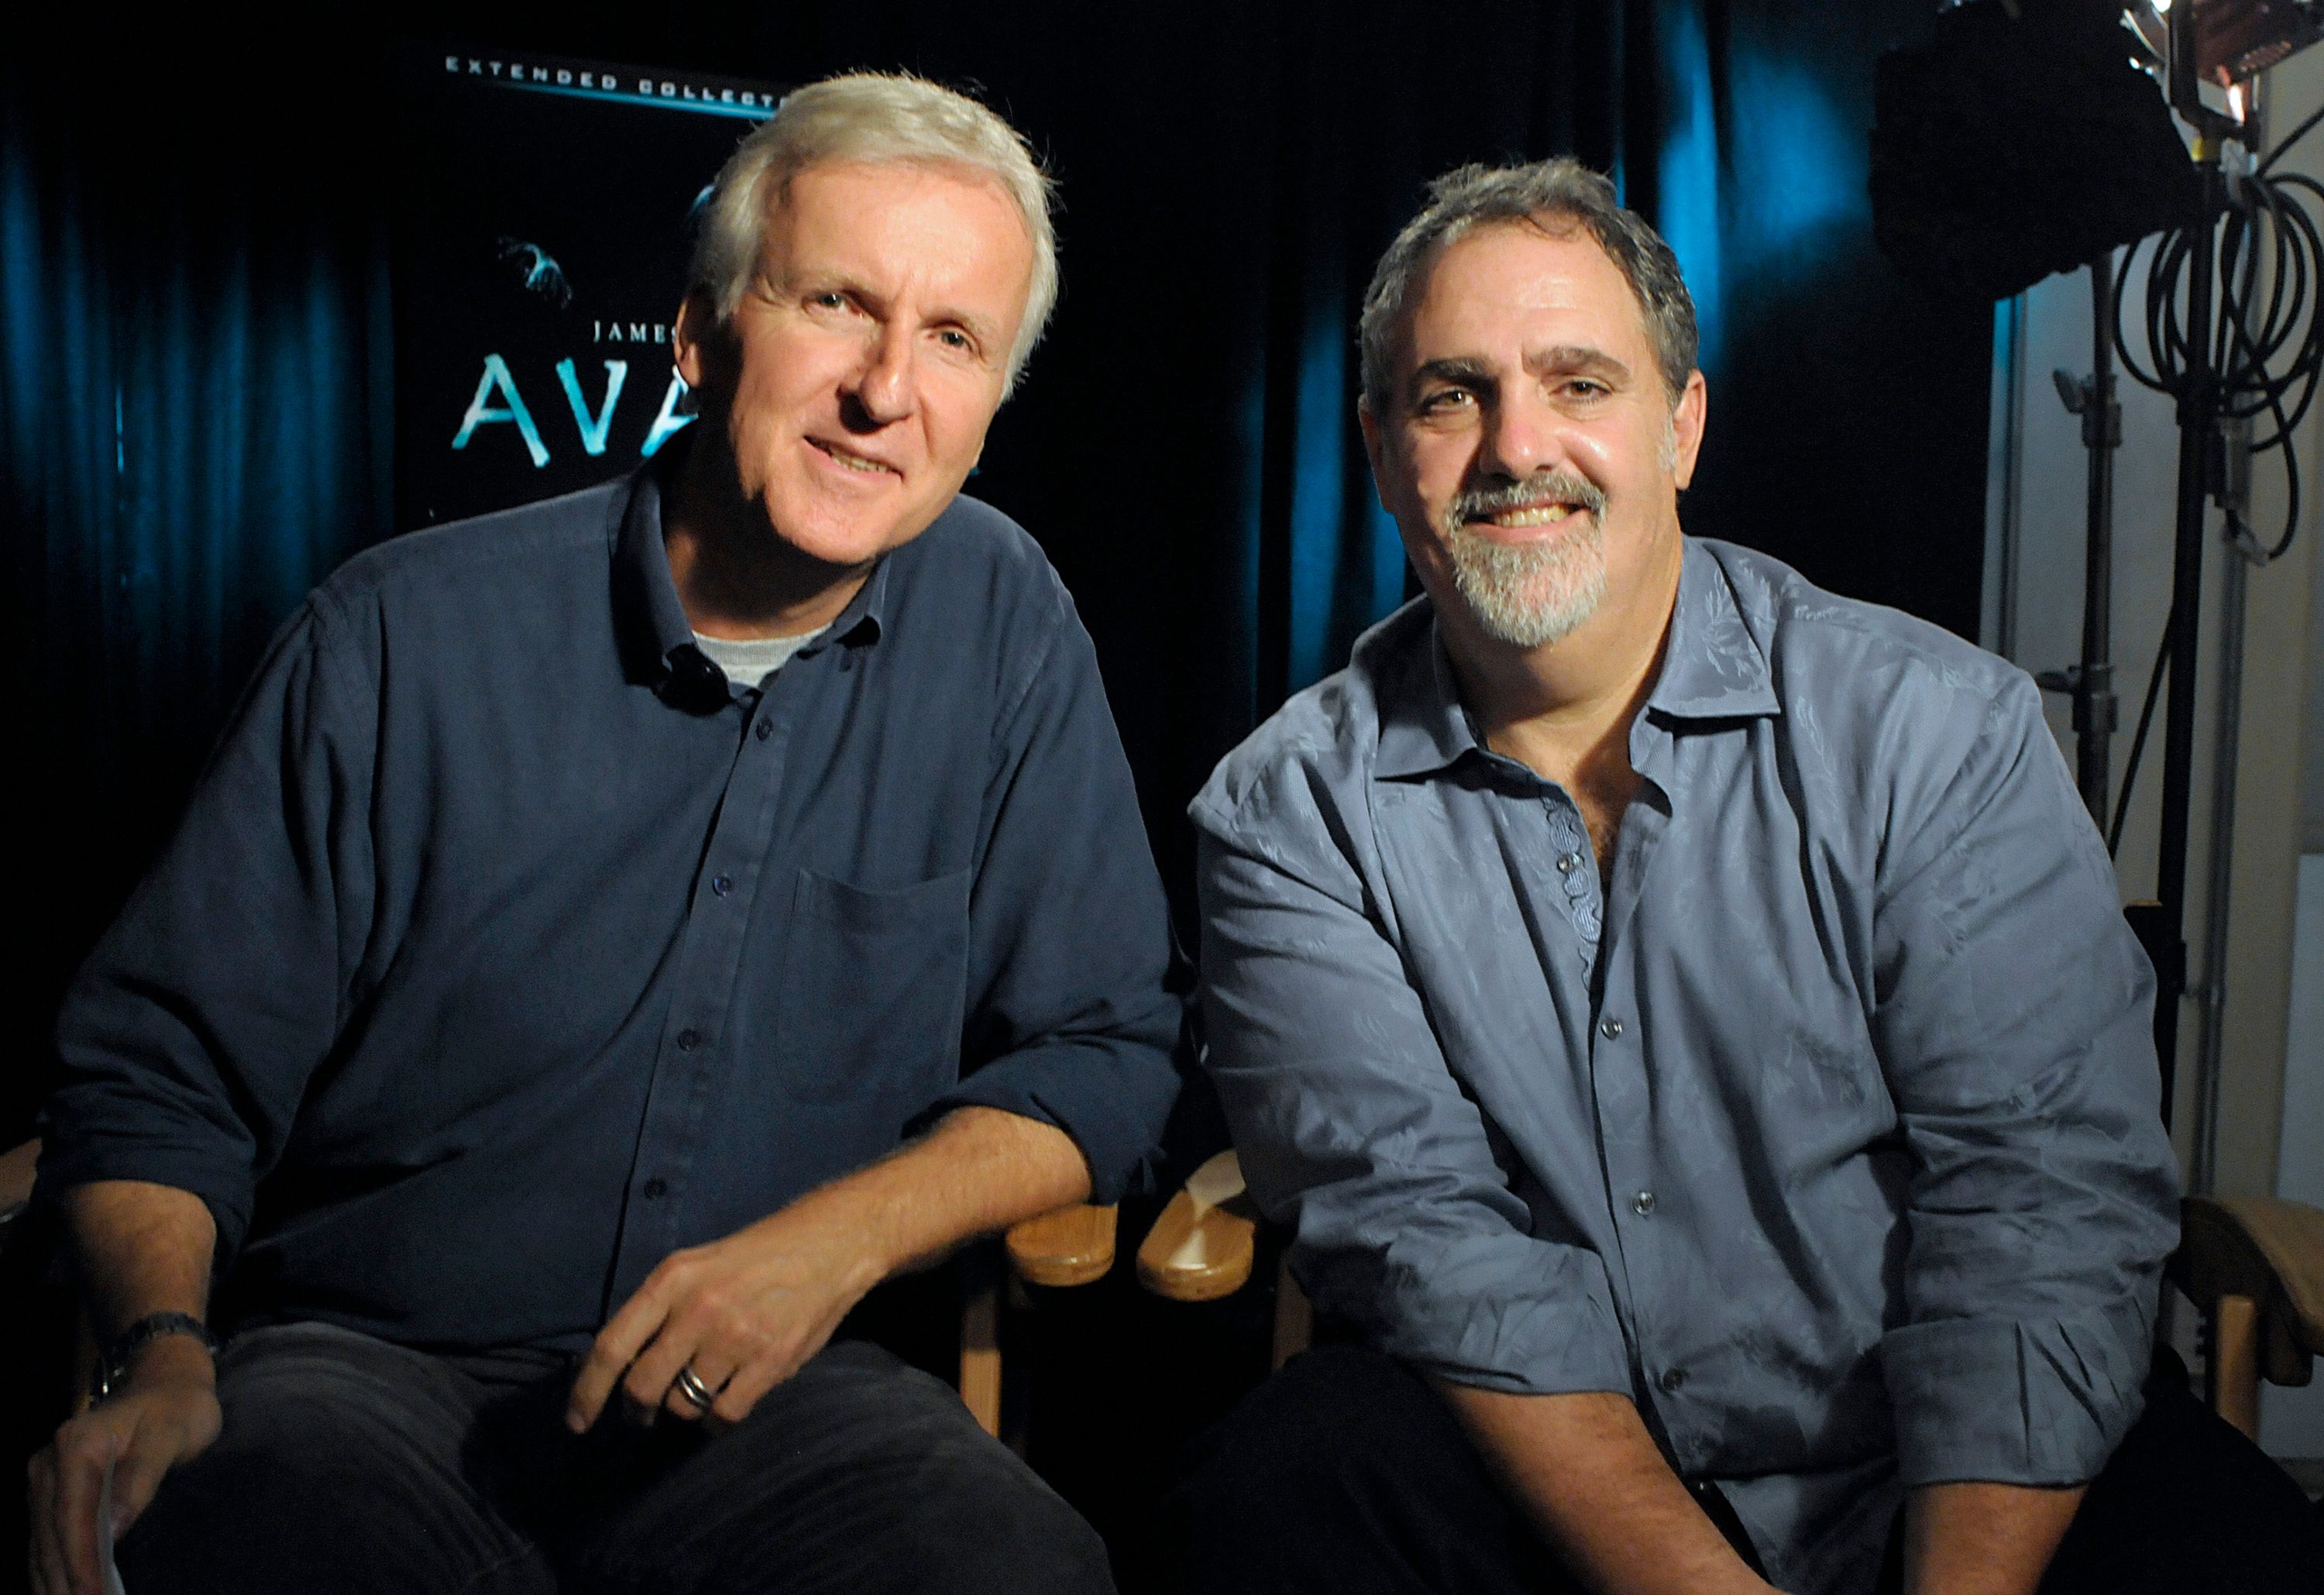 Director James Cameron joins producer Jon Landau to take us behind-the-scenes of AvatarOn November 16th fans will have another opportunity to go back to Pandora when the {0} Extended Collector's Edition Blu-ray and DVD hits stores. The new collection will include three versions of the film; the original theatrical cut, the special edition cut and a collector's edition cut. The new Collector's Edition cut will feature six additional minutes that were not included in the special edition, making th